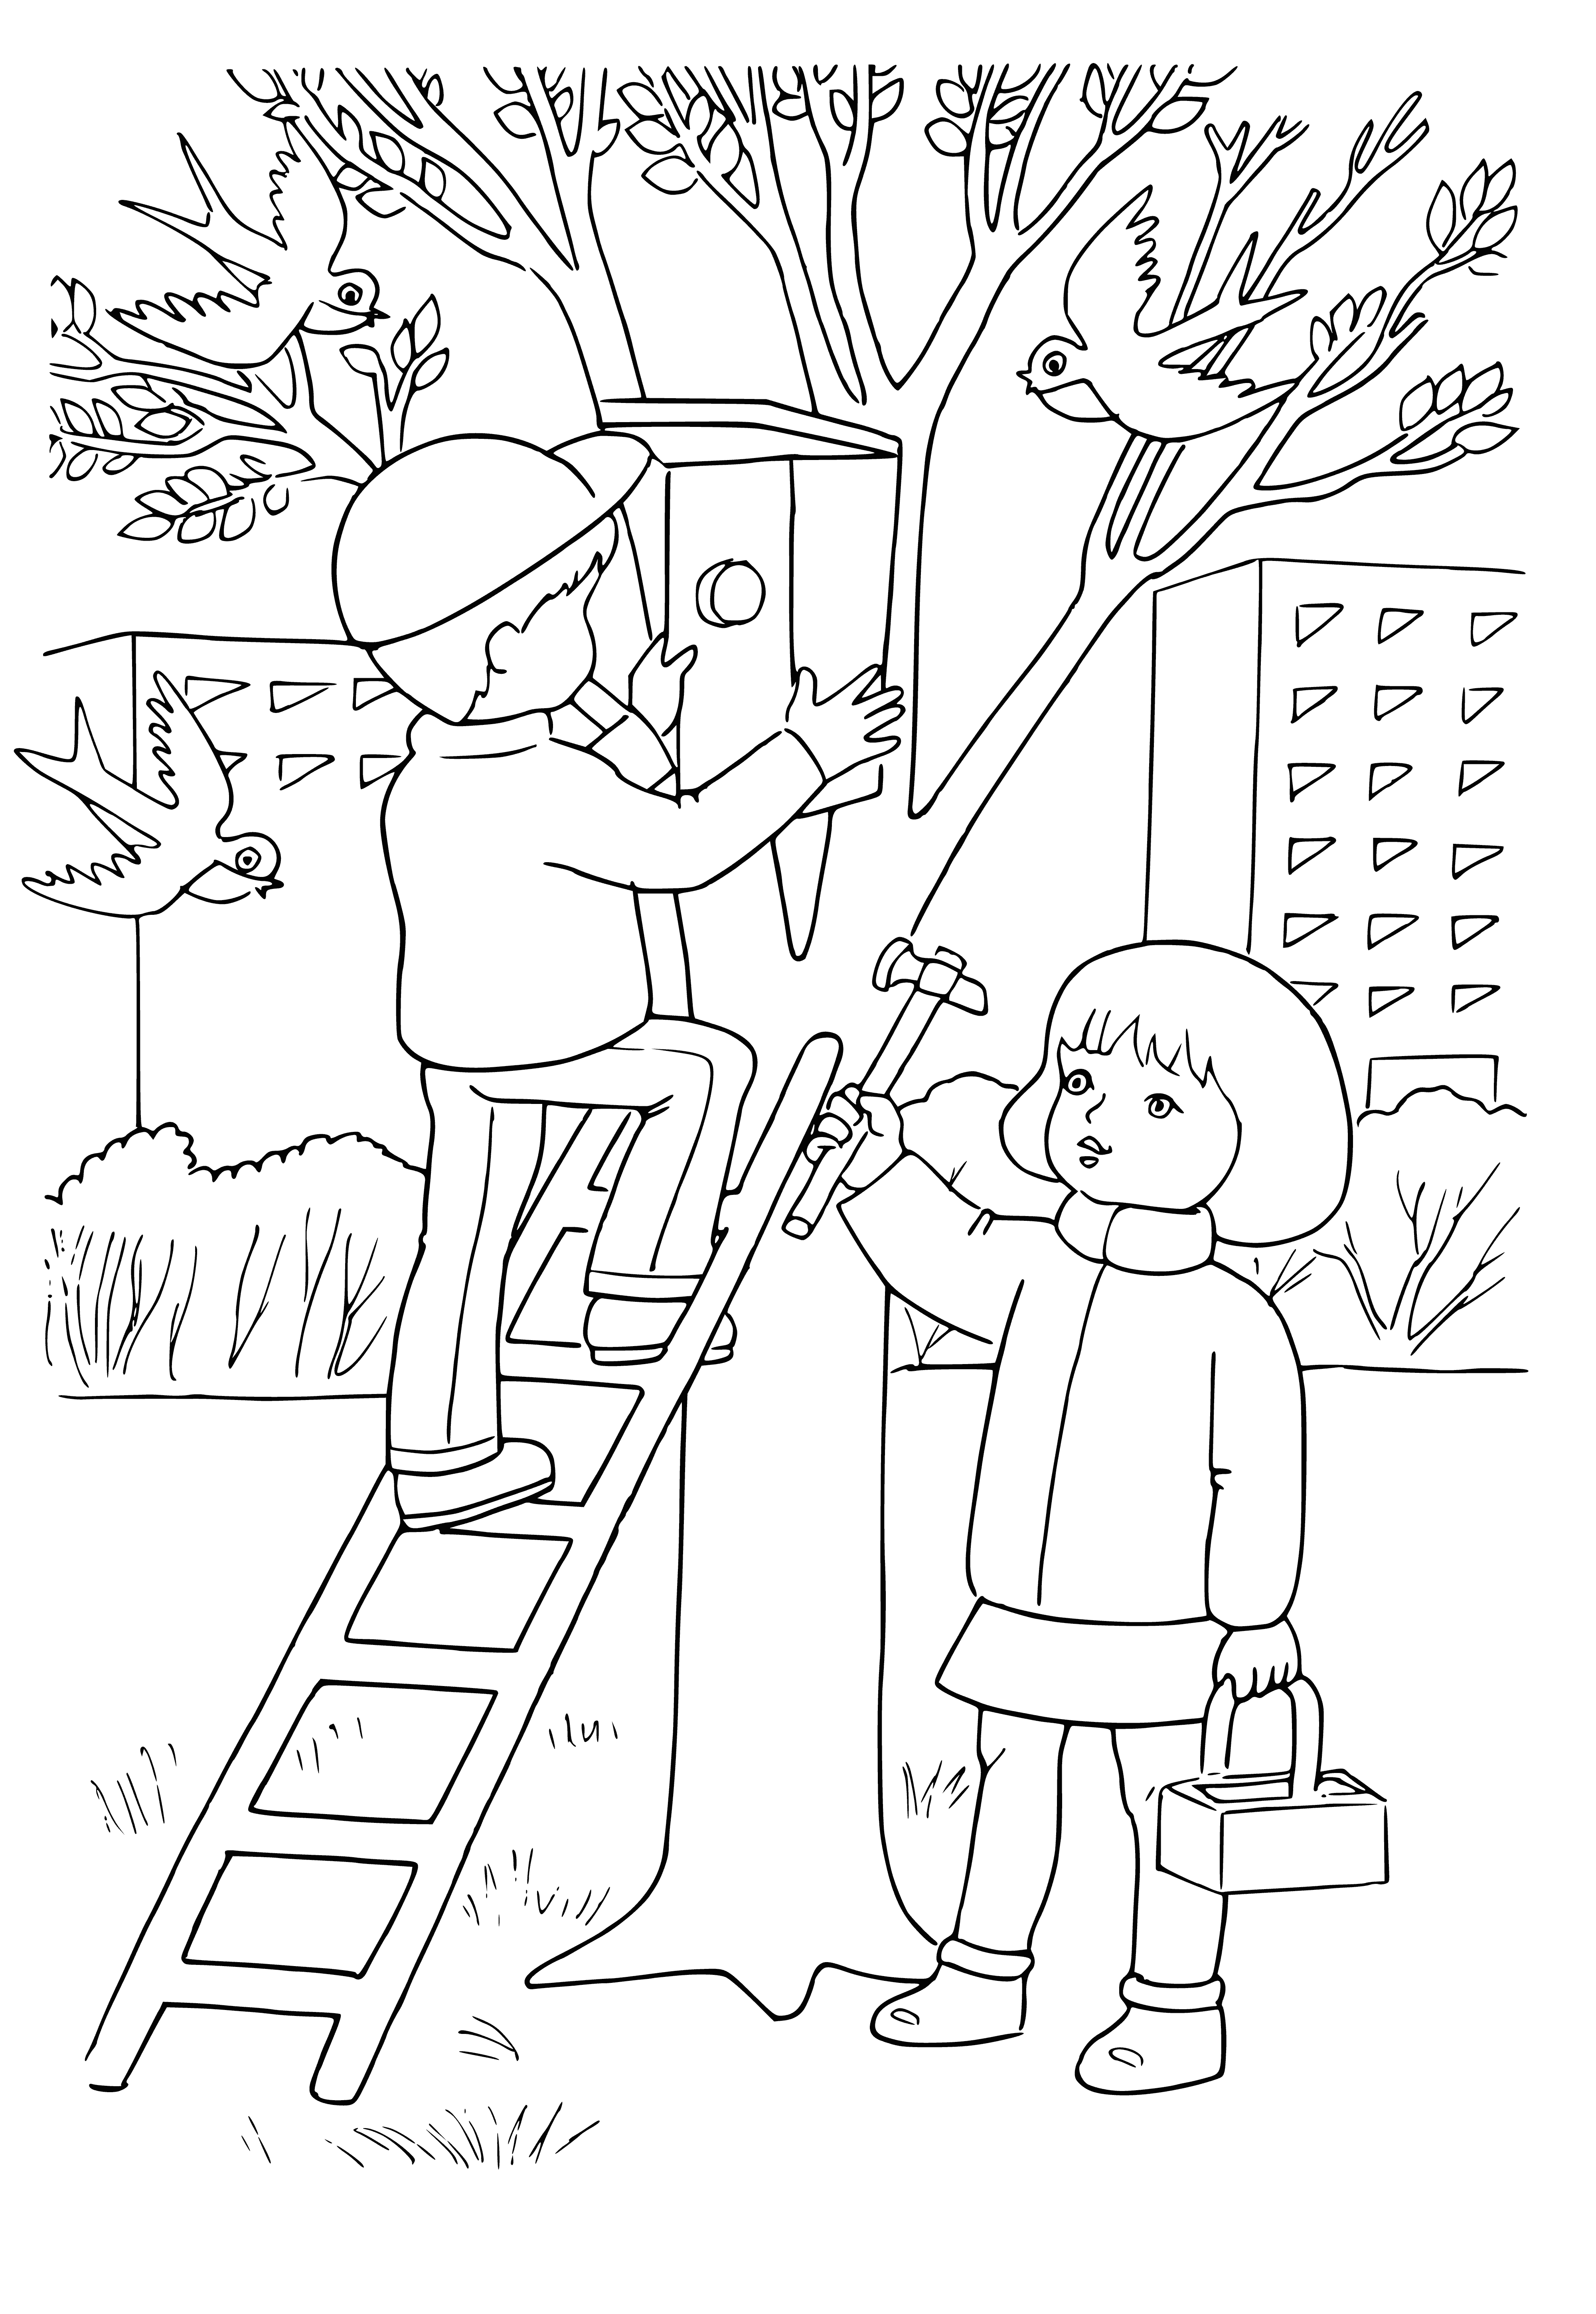 coloring page: A birdhouse with a blue roof & white body is surrounded by flowers. A blue bird with yellow wings perched on top & two yellow birds flying in the sky.